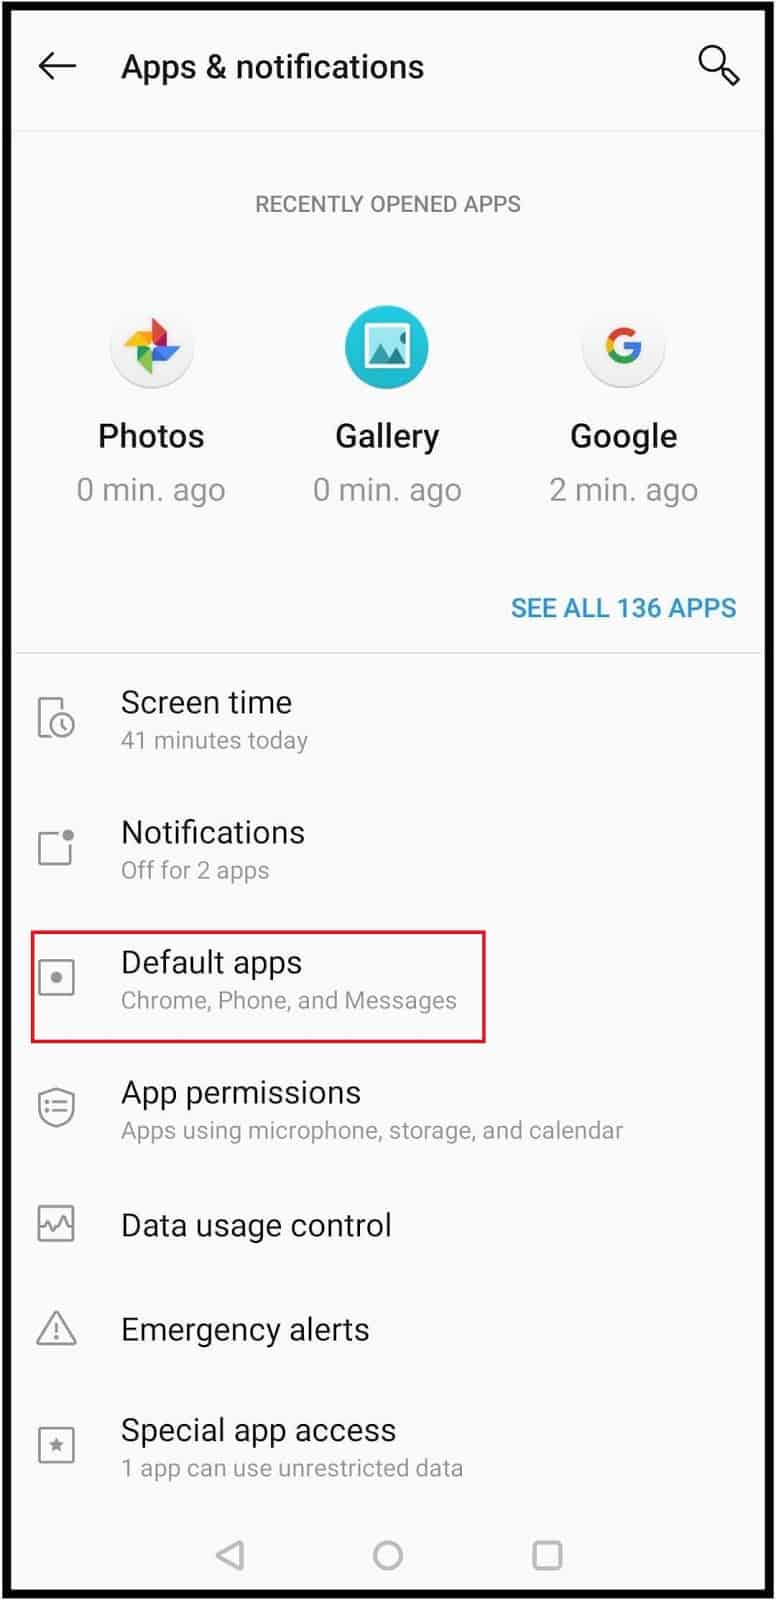 Click on the Default apps option